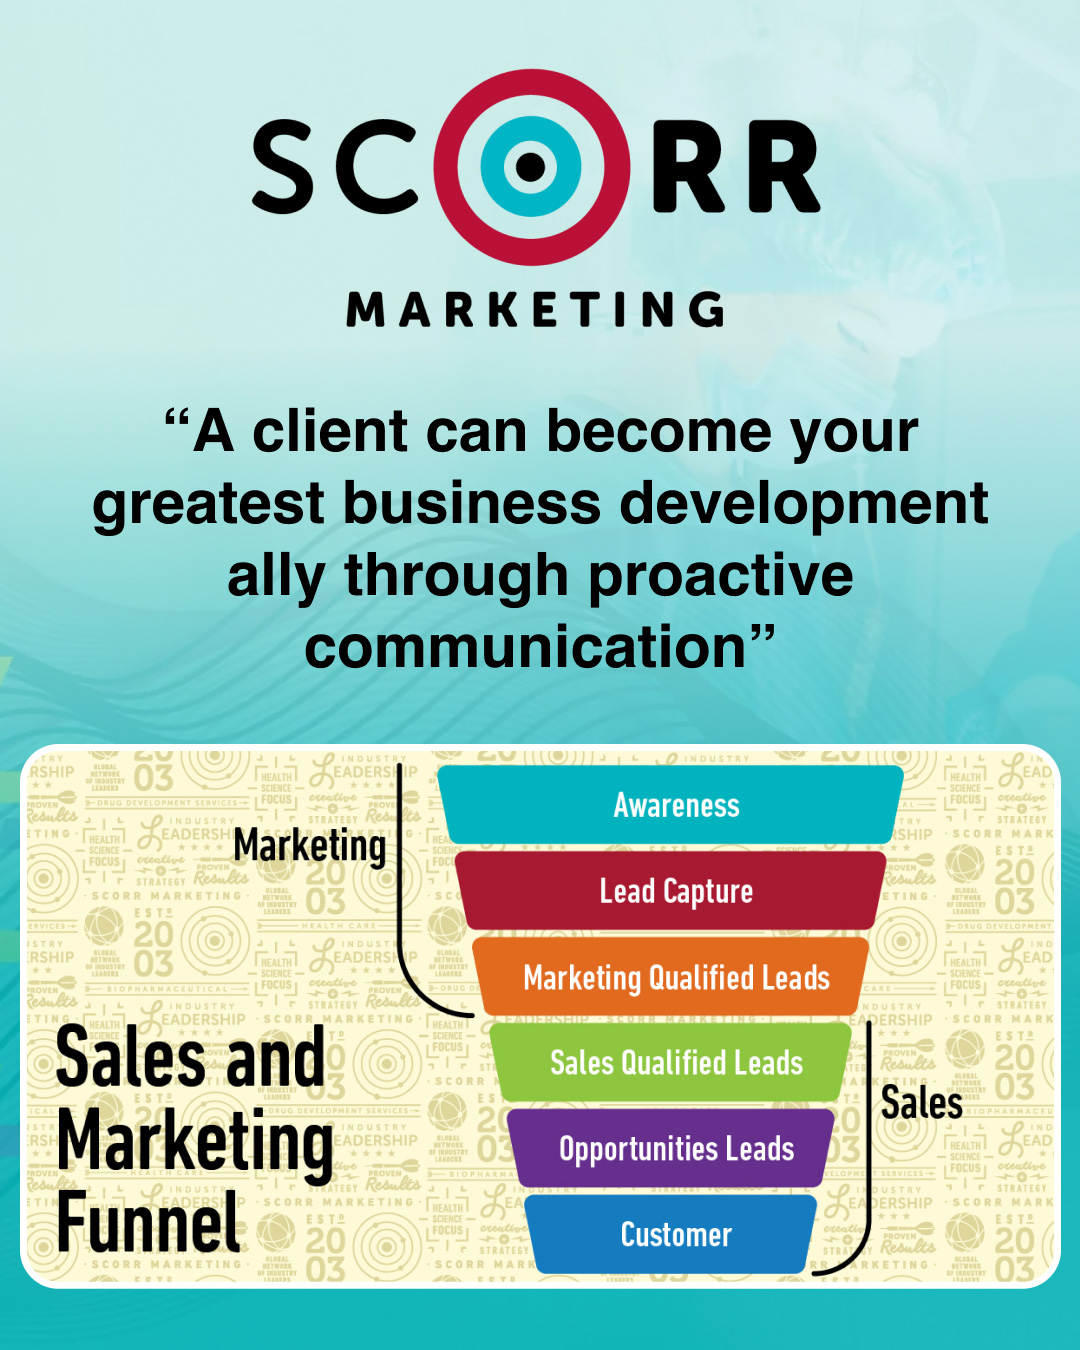 “A client can become your greatest business development ally through proactive communication”